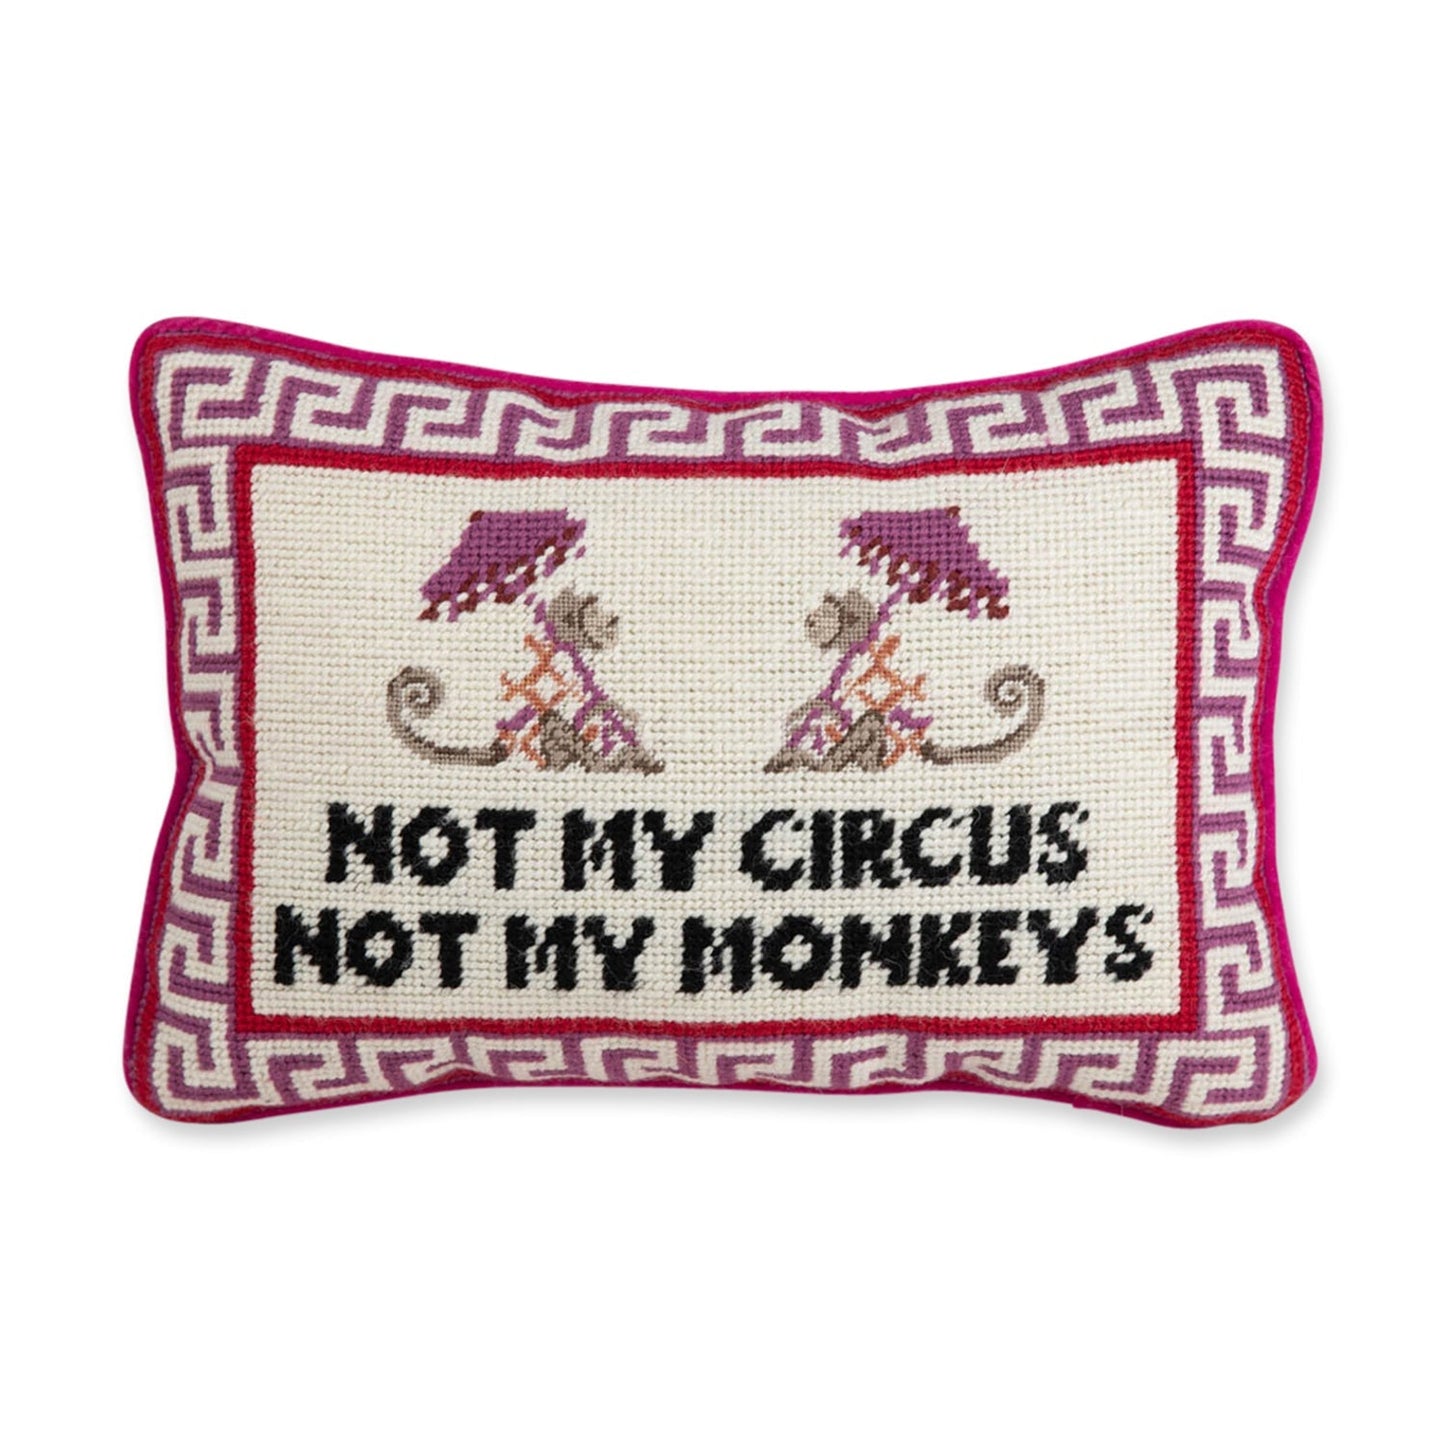 NOT MY CIRCUS NEEDLEPOINT PILLOW - Gaines Jewelers